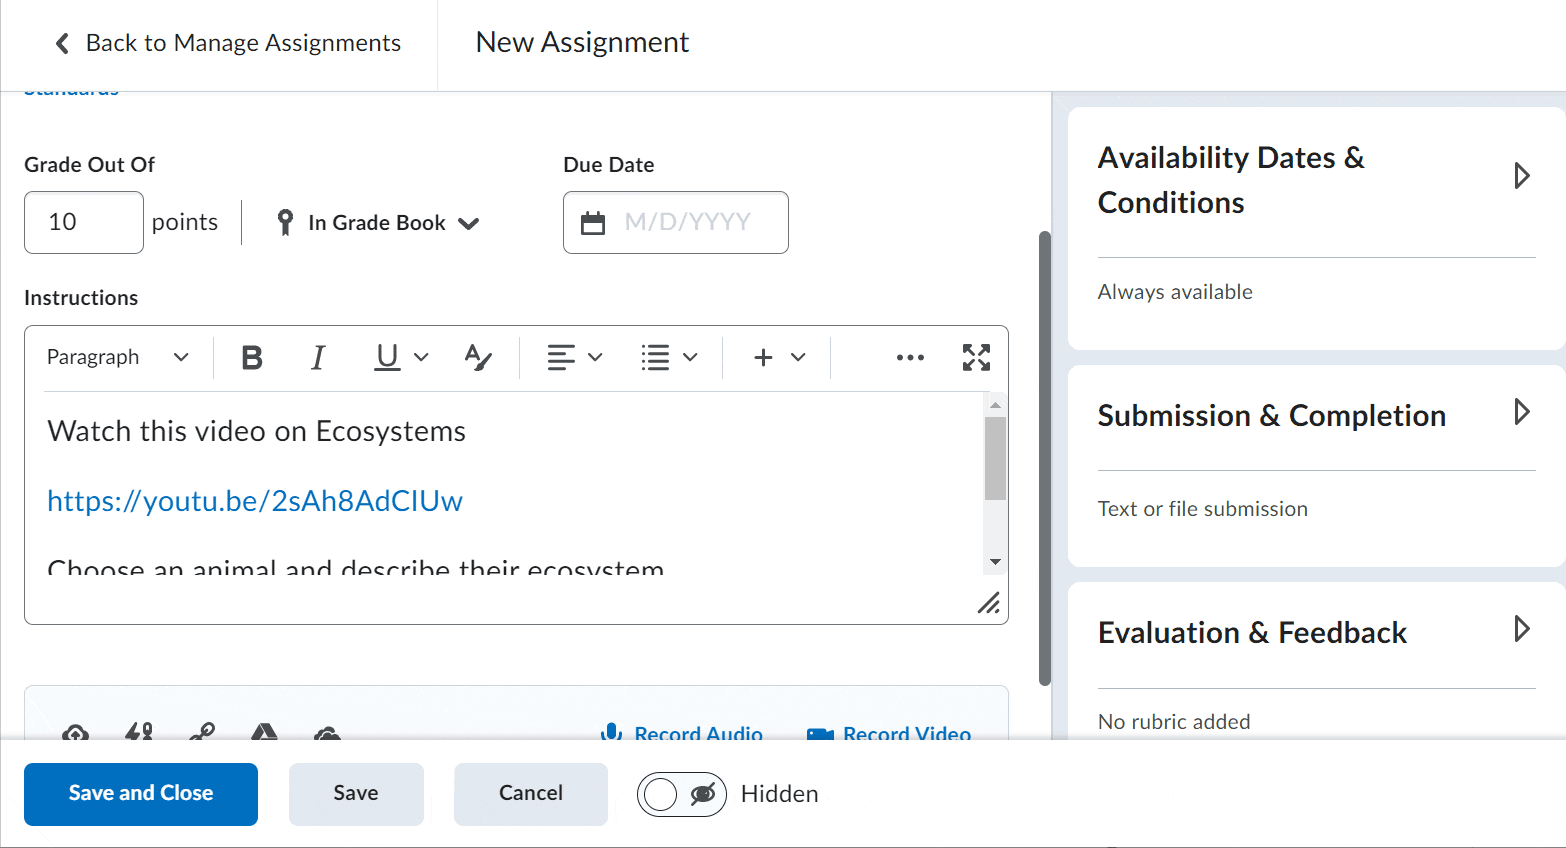 The New Folder page with activity dates and date settings being set.